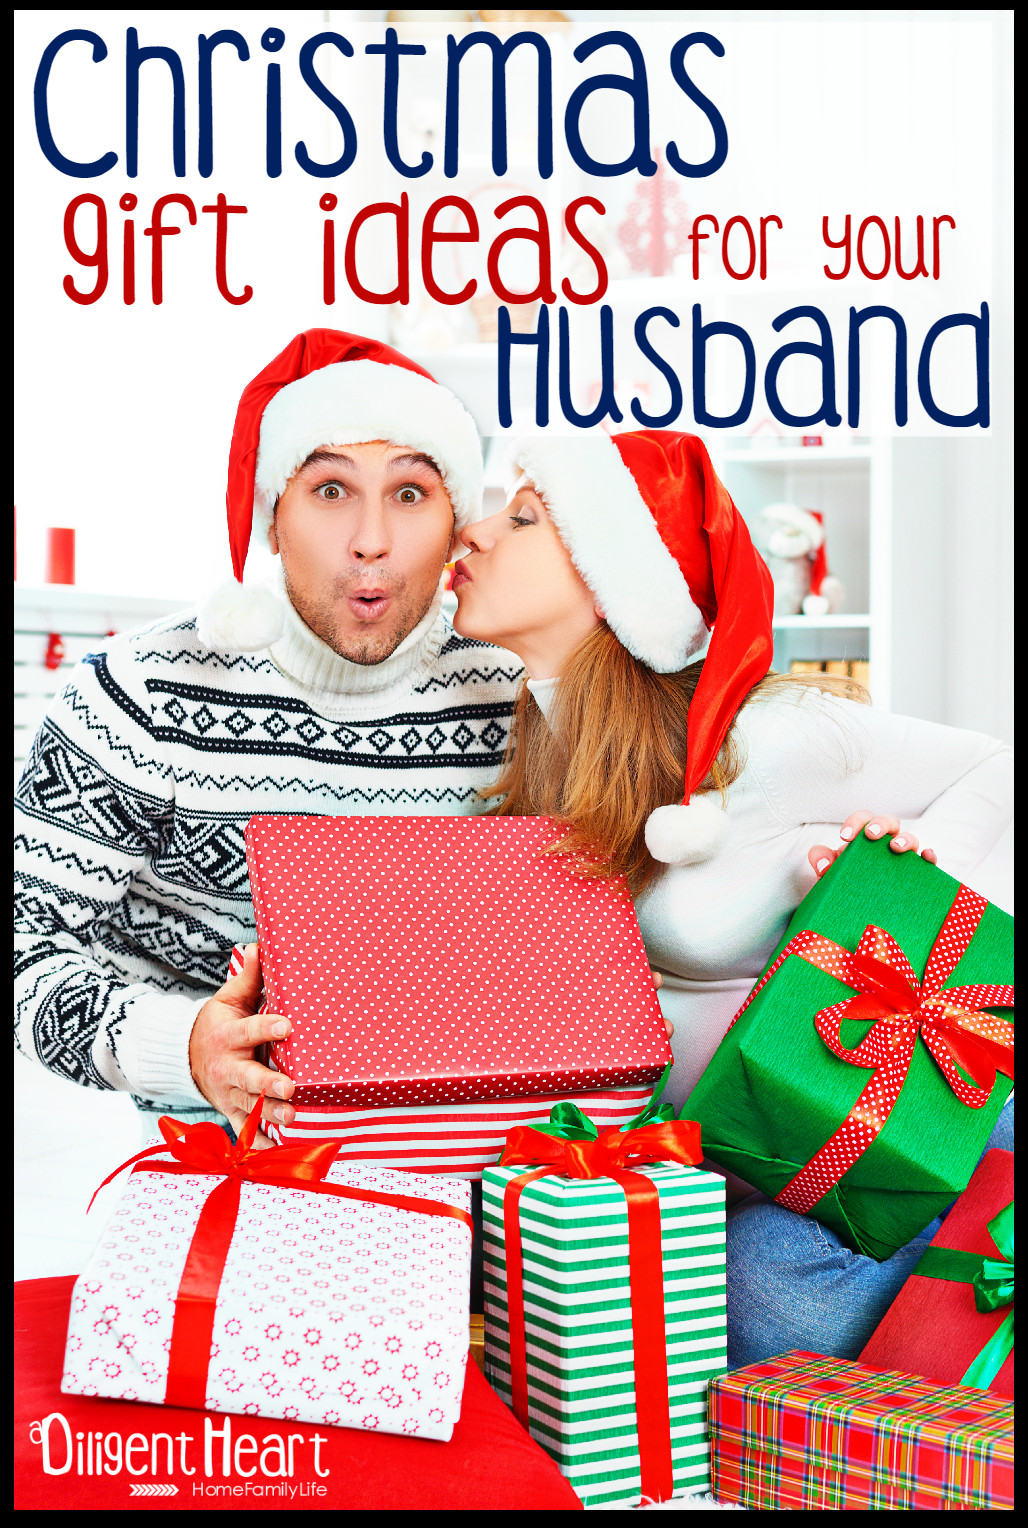 Christmas Gift Ideas For Your Husband
 Christmas Gift Ideas For Your Husband